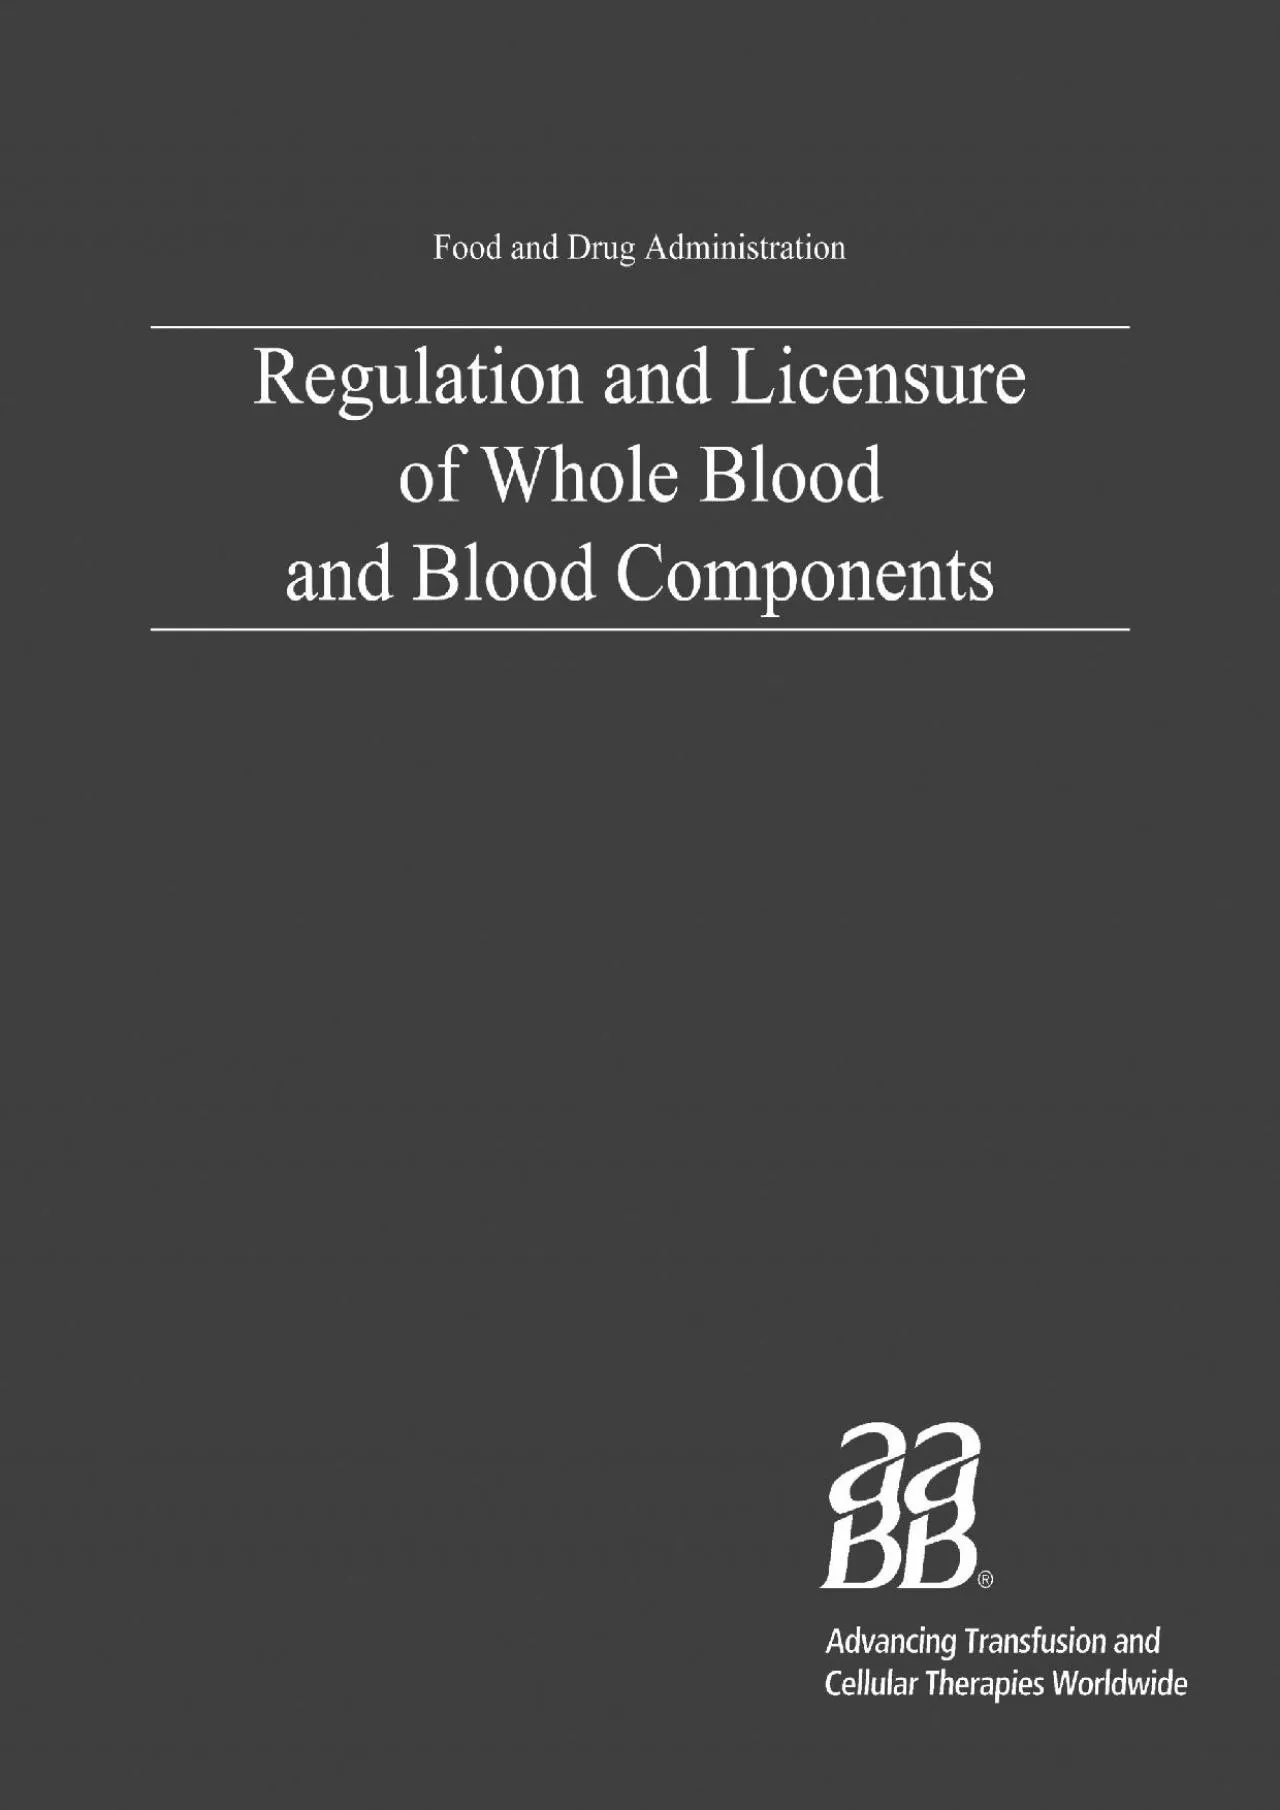 (BOOS)-Regulation and Licensure of Whole Blood and Blood Components